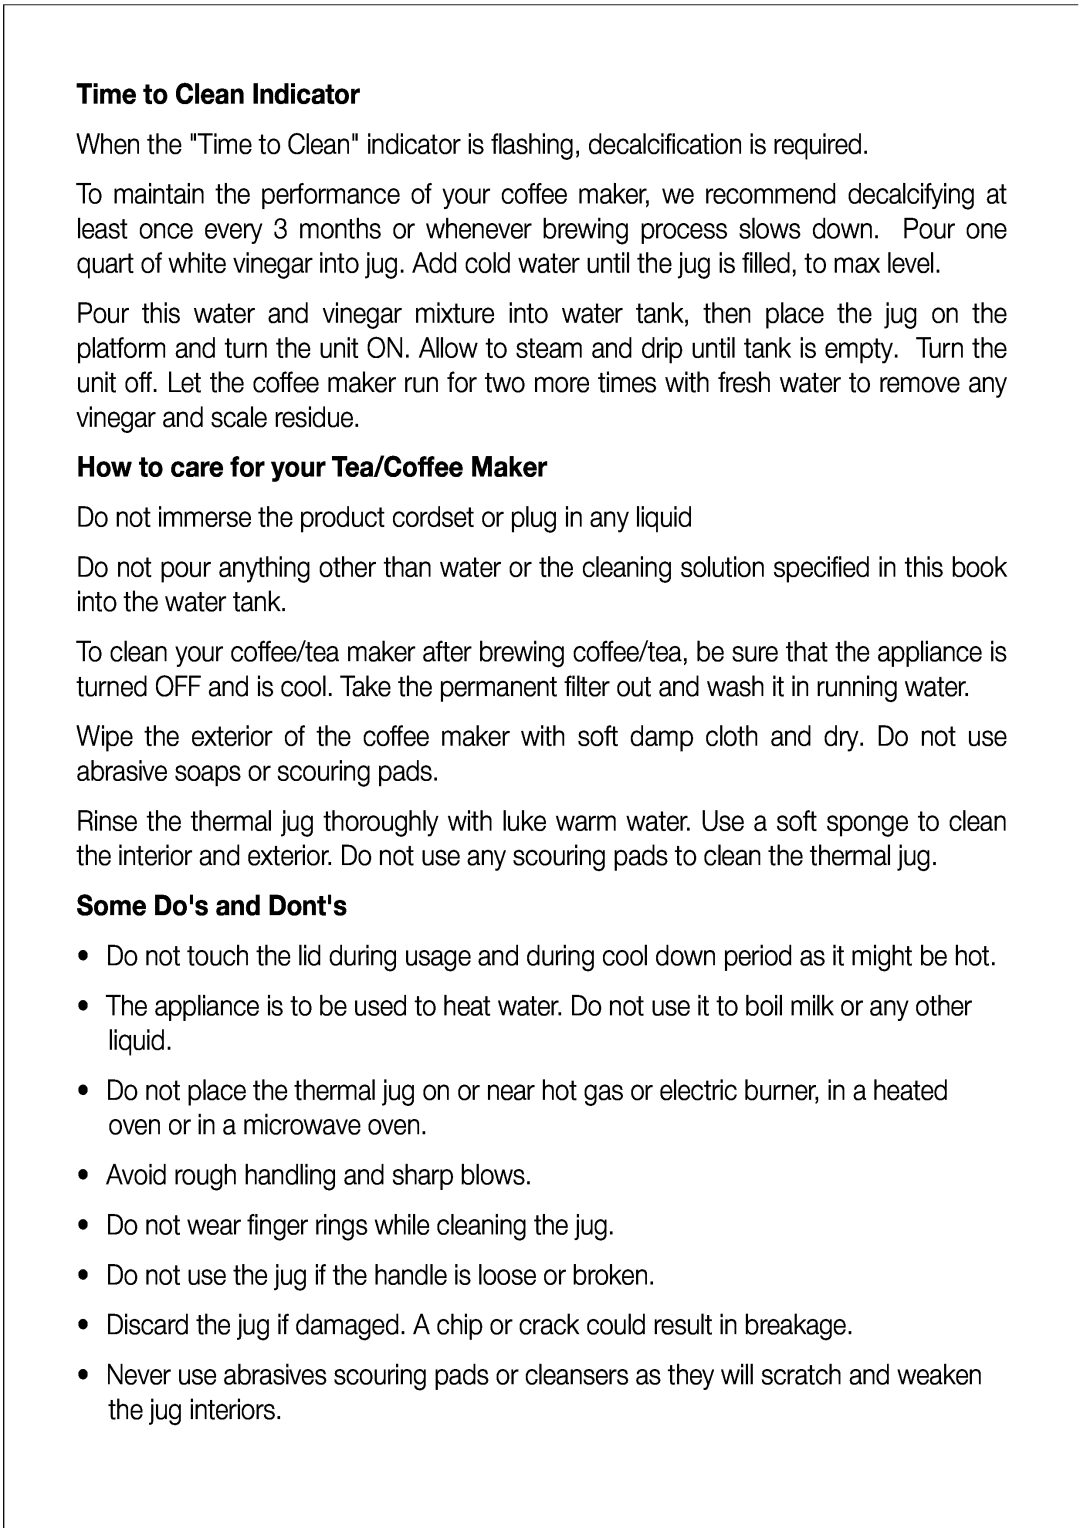 Black & Decker DCM85 manual Time to Clean Indicator, How to care for your Tea/Coffee Maker, Some Dos and Donts 